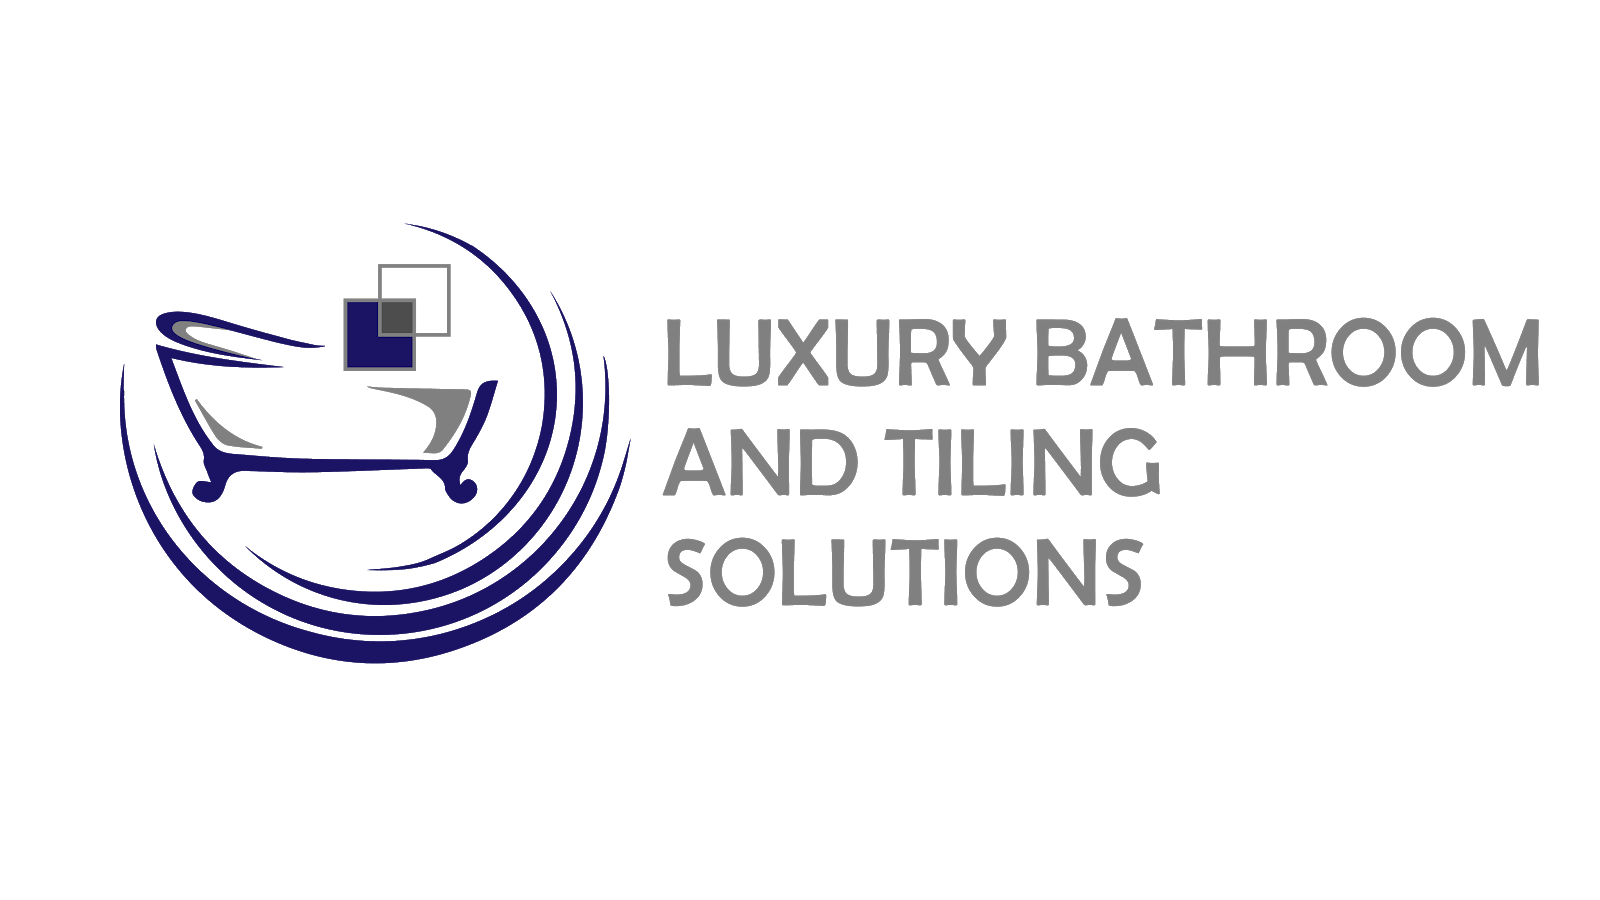 LUXRUY BATHROOM AND TILING SOLUTIONS